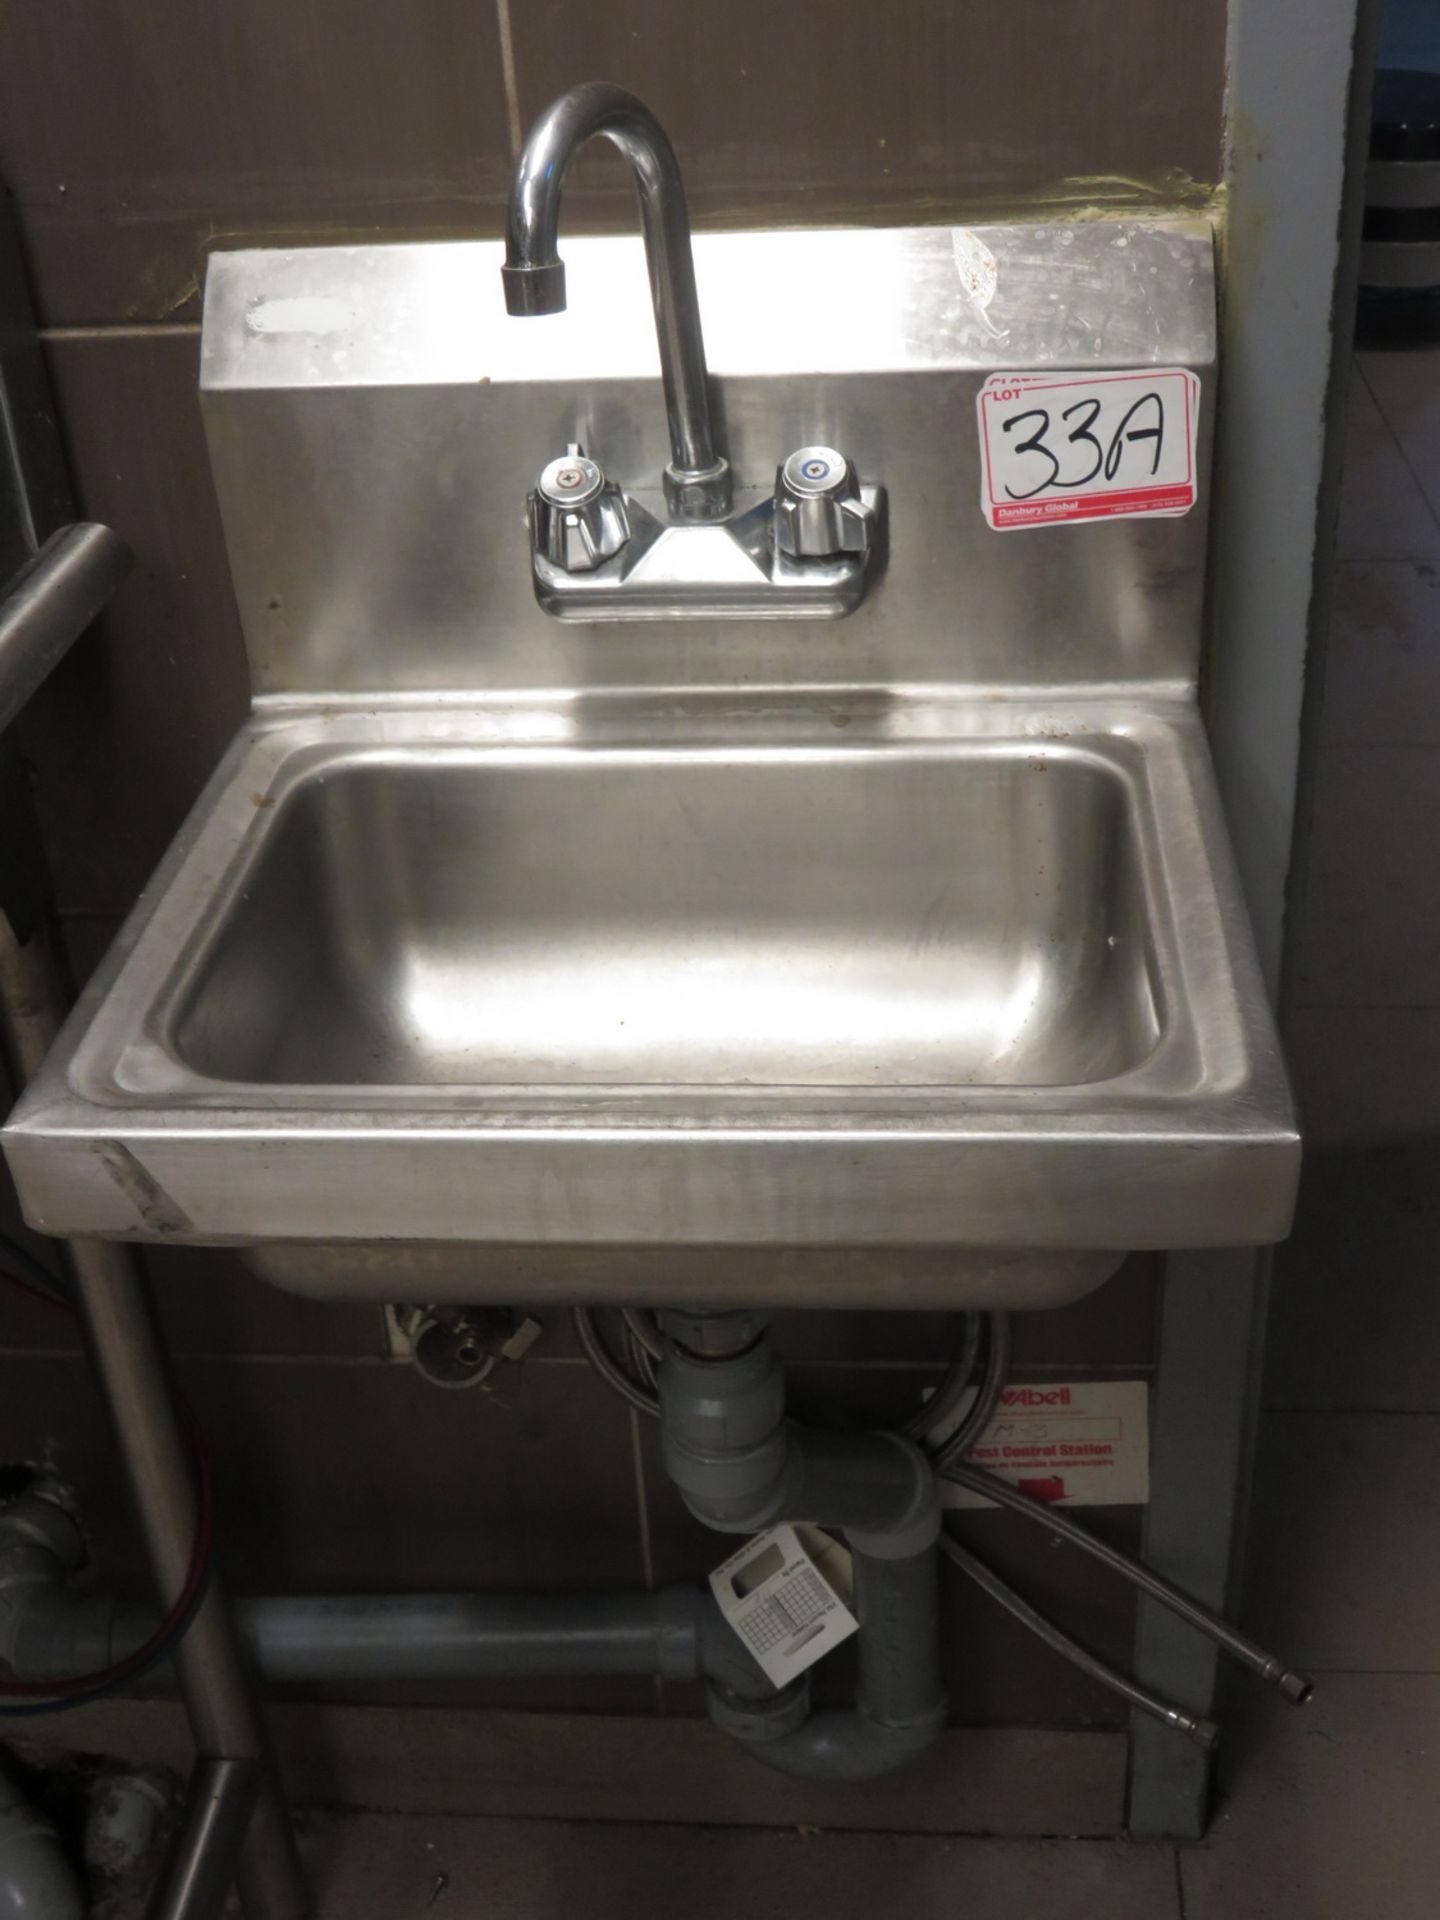 UNITS - NELLA STAINLESS STEEL 15" X 17" WALL MOUNT SINKS (3-UNITS) & (1) STAINLESS 12" X 18" SINK - Image 2 of 3